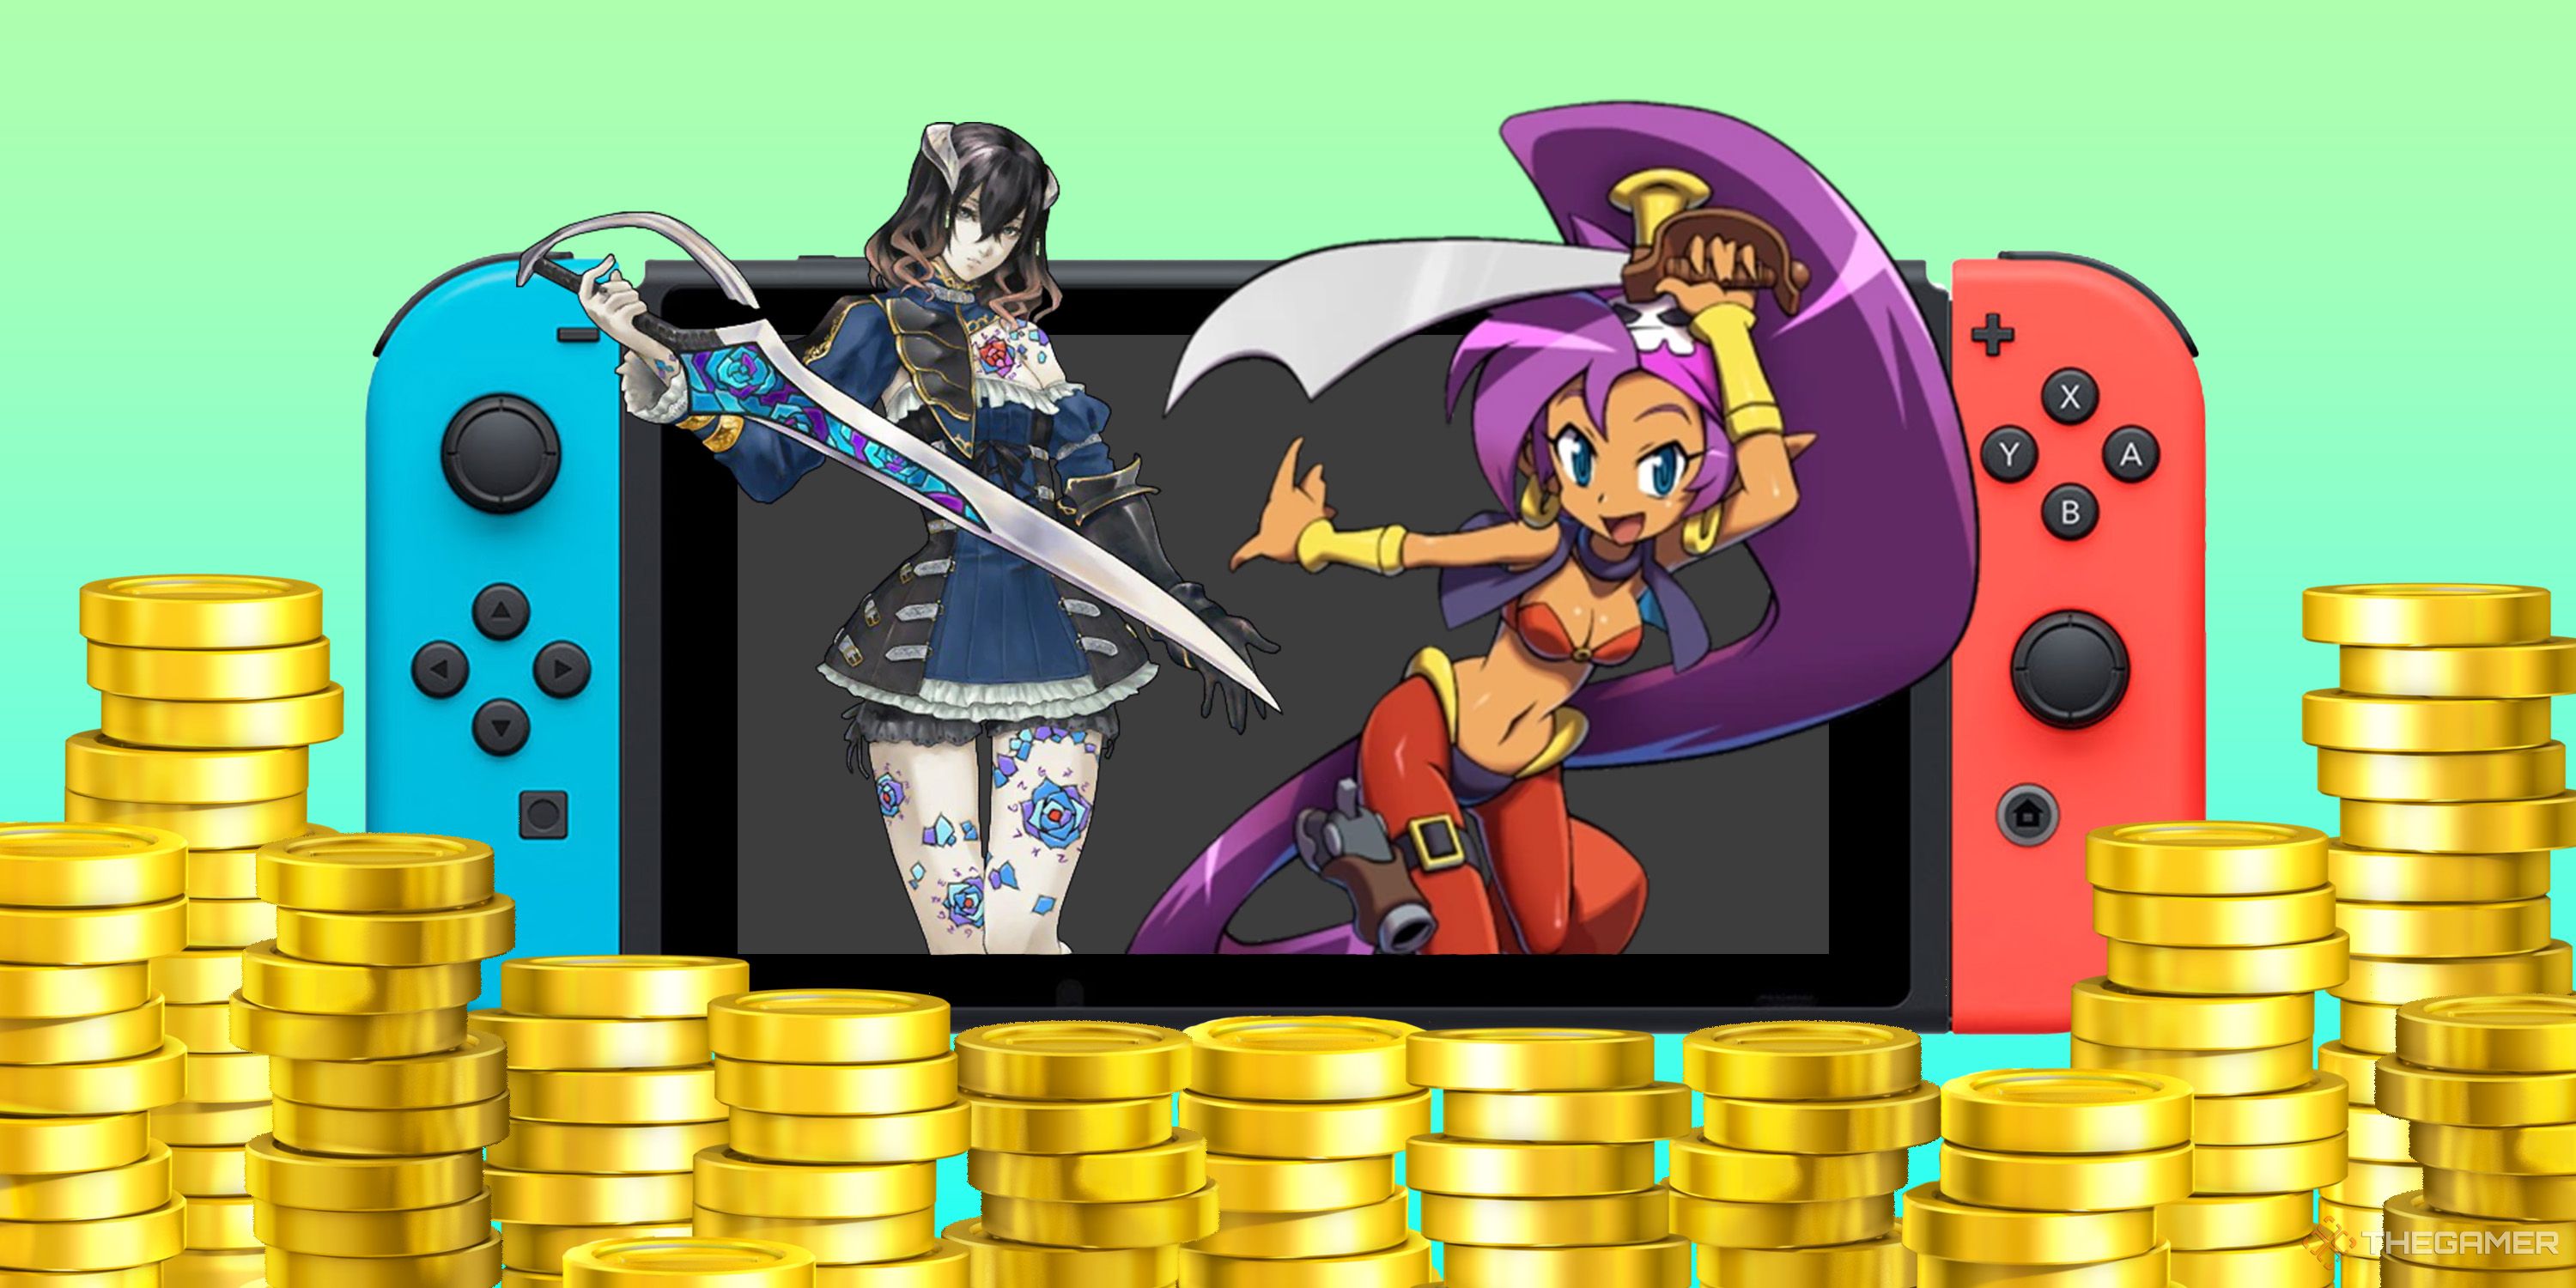 Shantae and Miriam emerging from a Nintendo Switch surrounded by gold coins